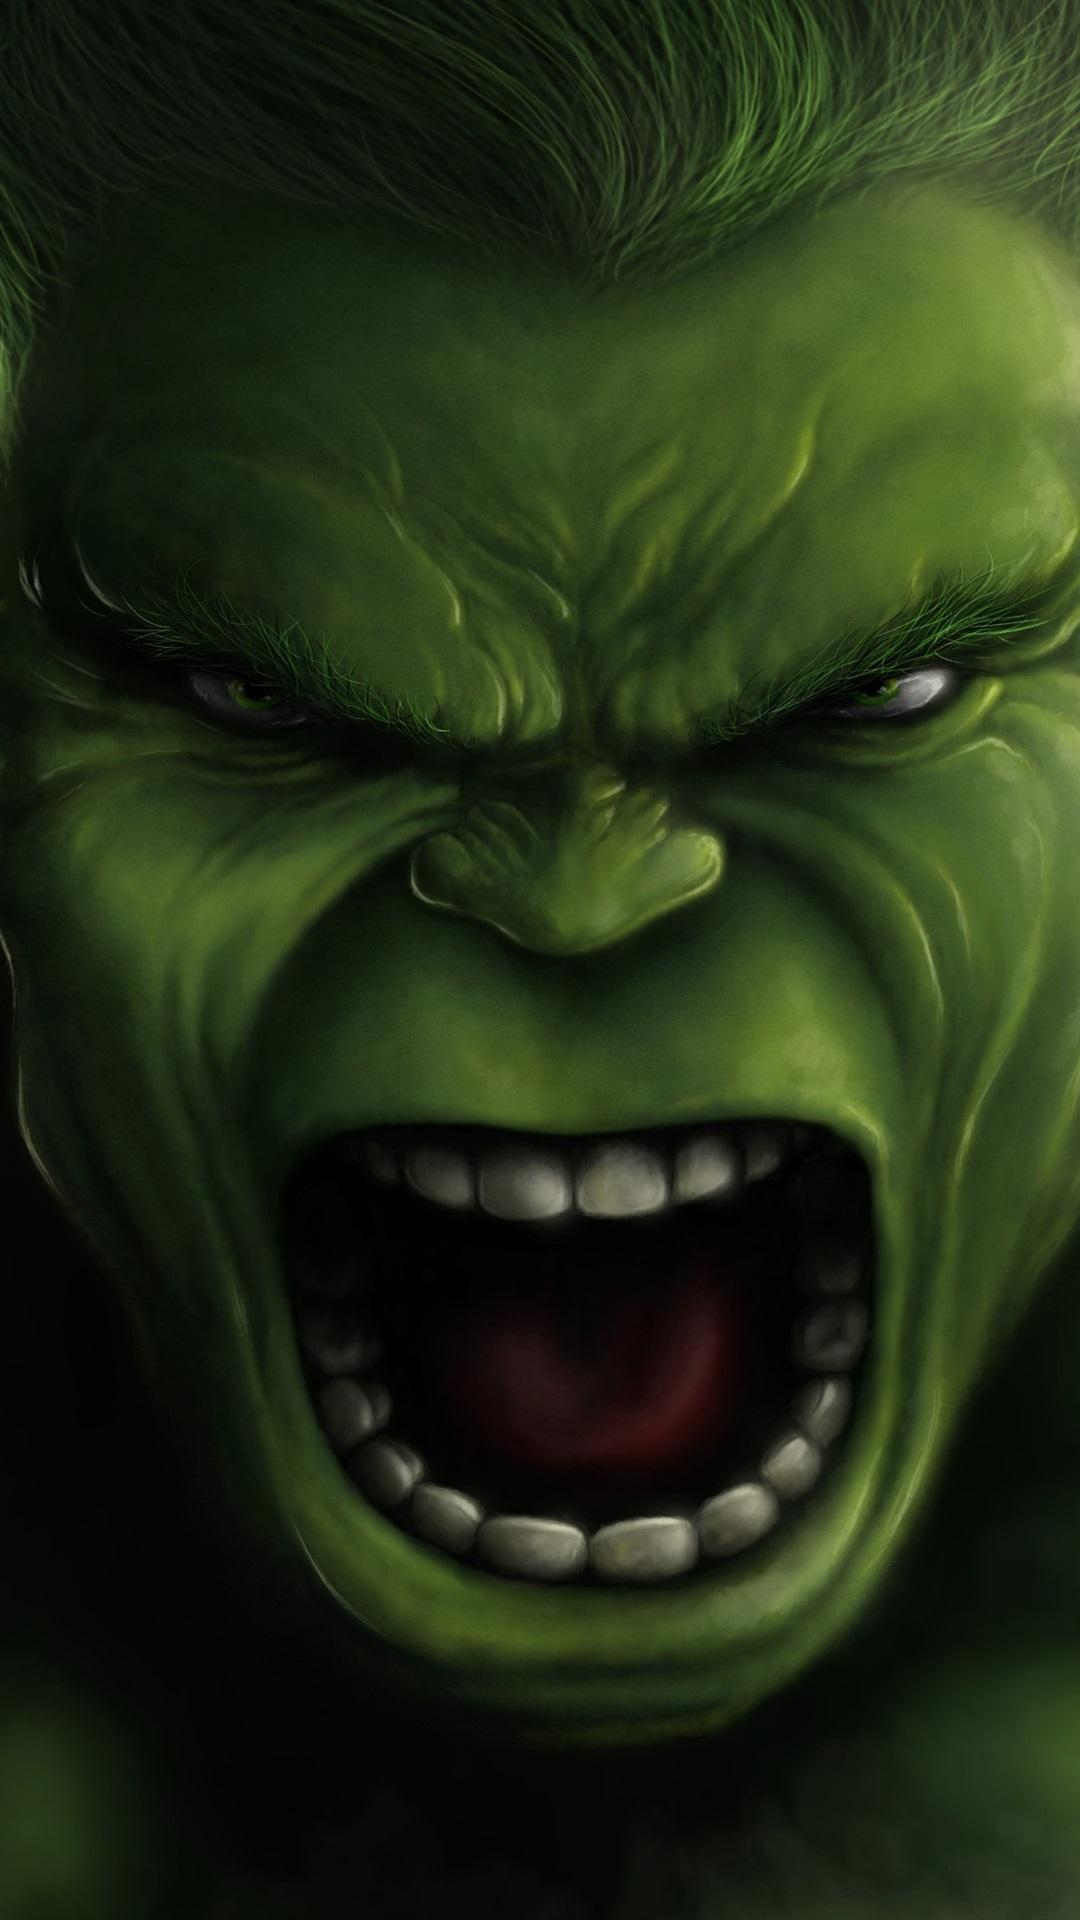 The Hulk, Face, Marvel Comics, Art Picture 1080x1920 IPhone 8 7 6 6S Plus Wallpaper, Background, Picture, Image